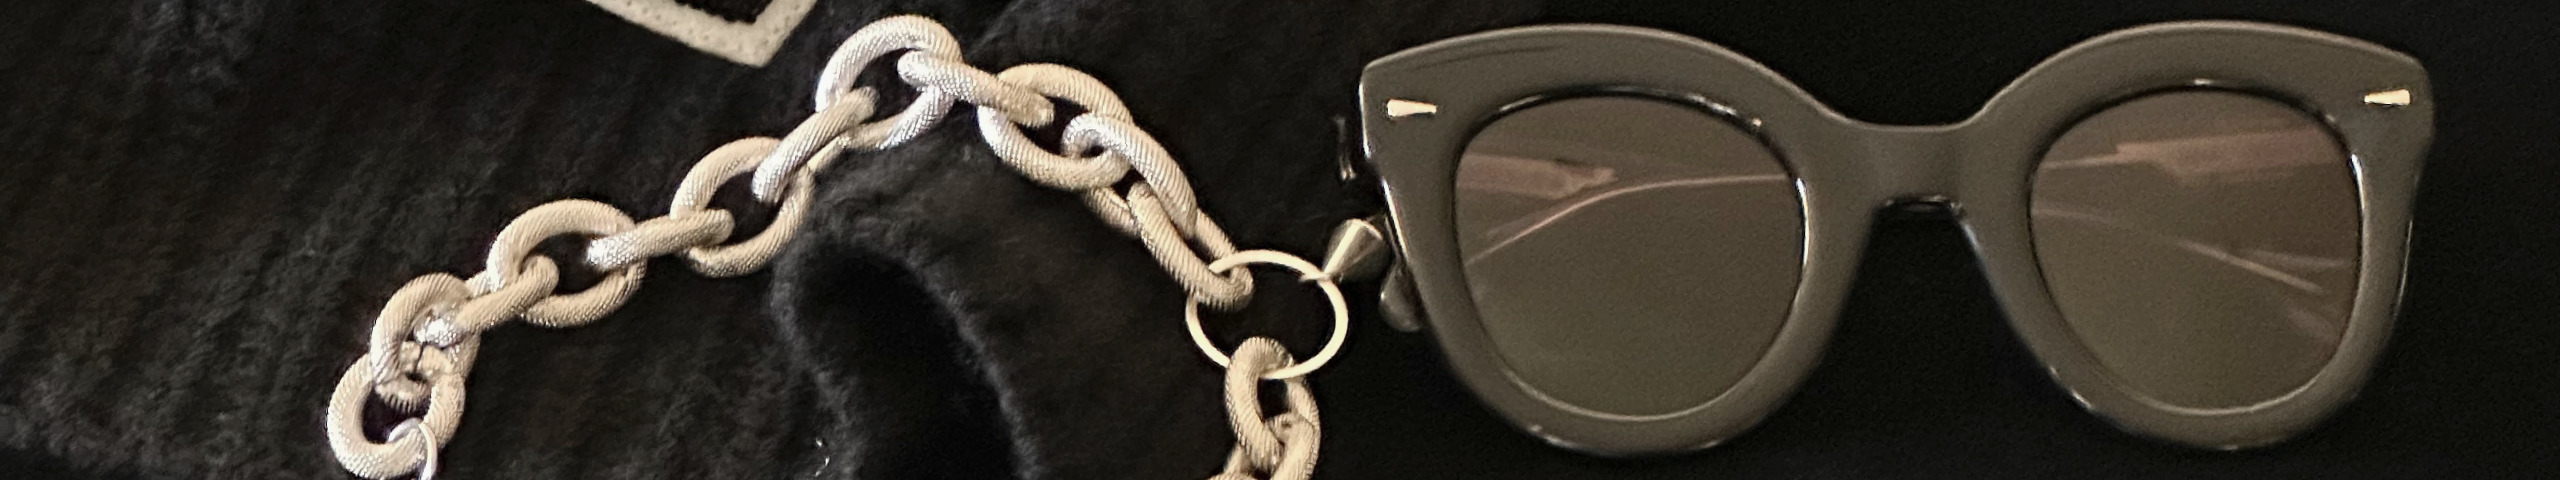 Eyes On Off magnetic eyewear chains